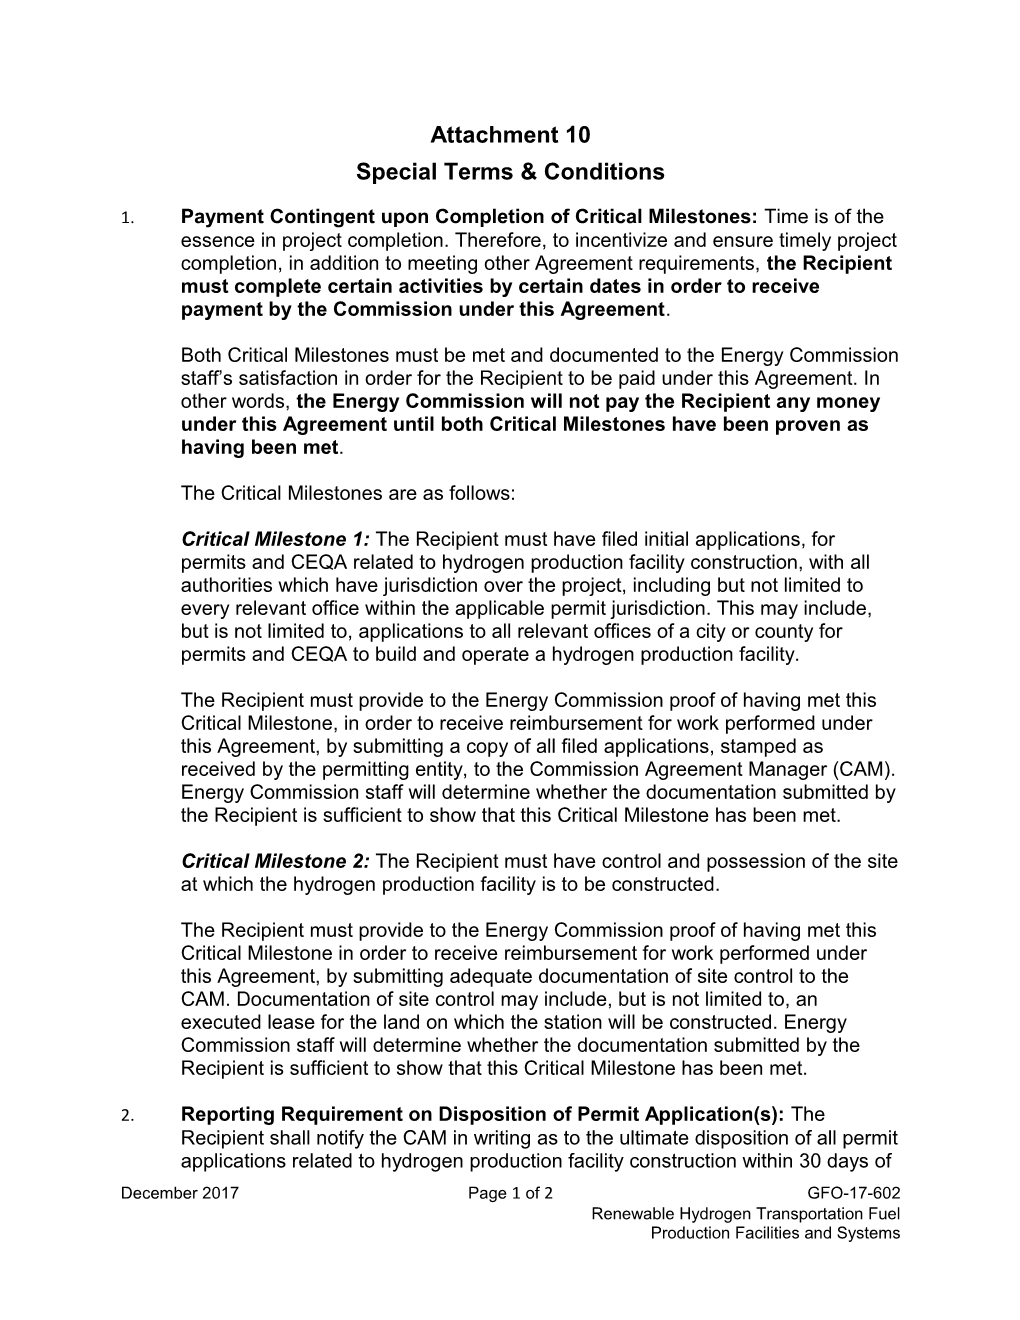 Special Terms & Conditions s1